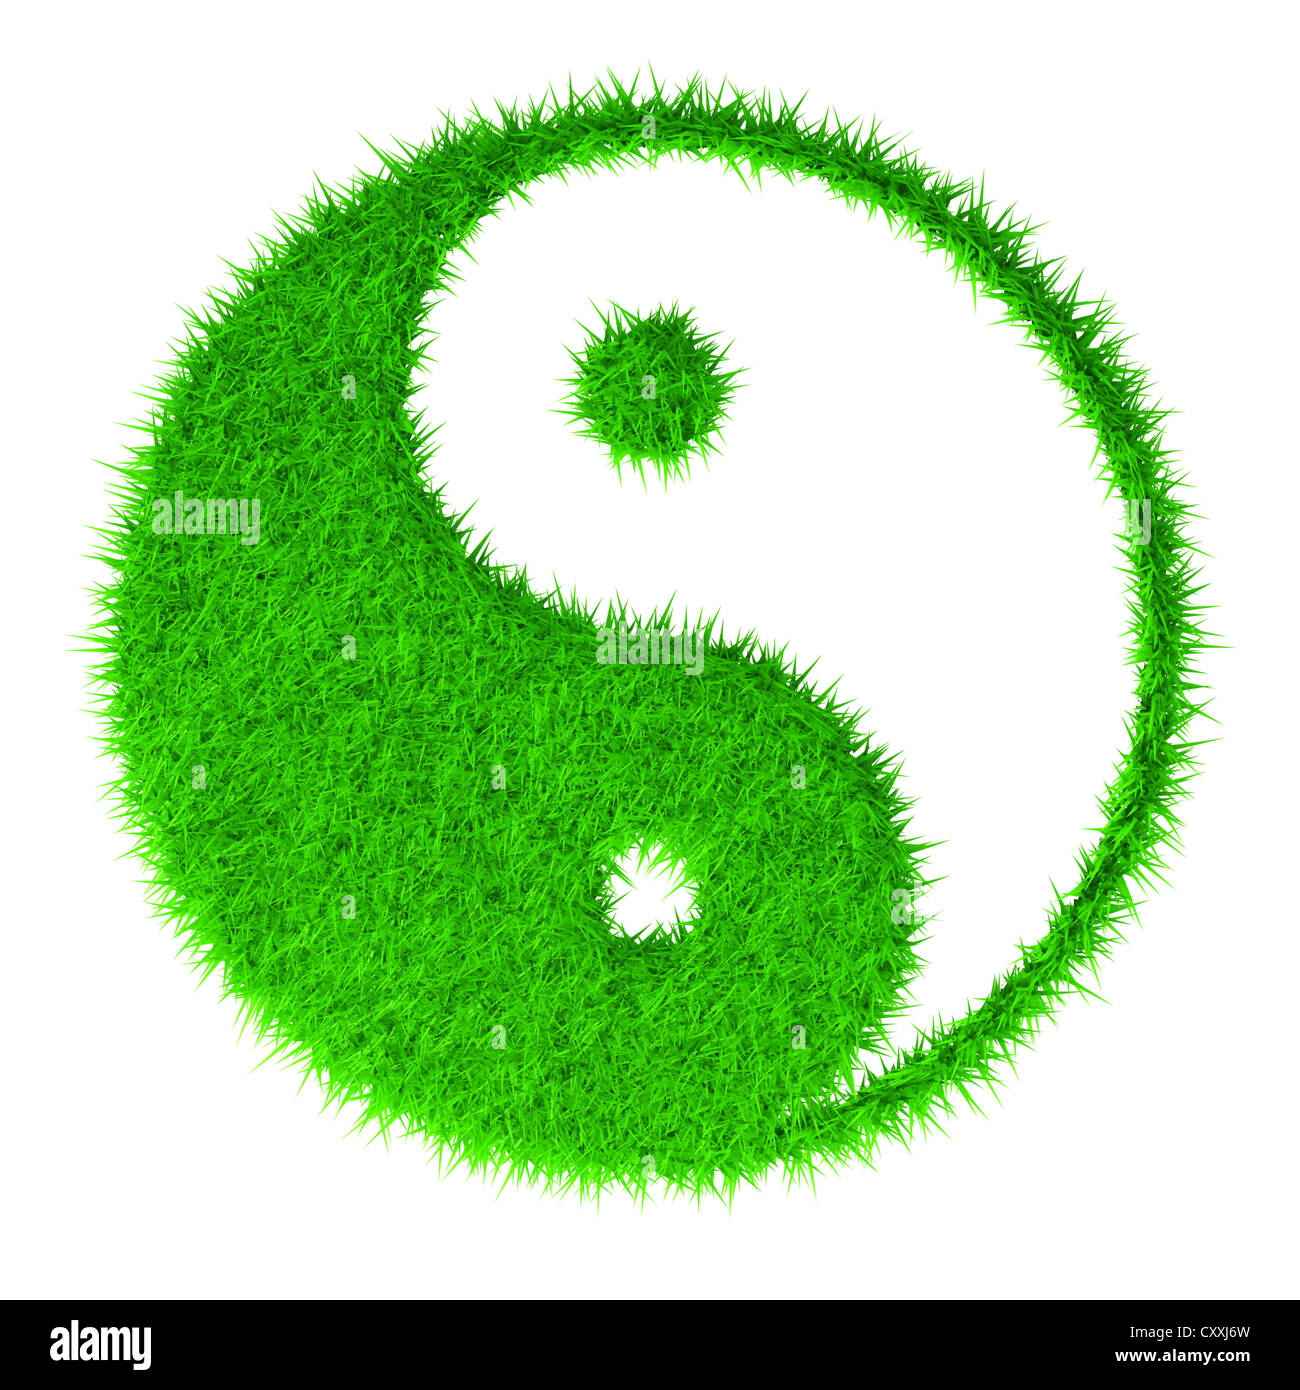 The yin and yang grass sign Stock Photo